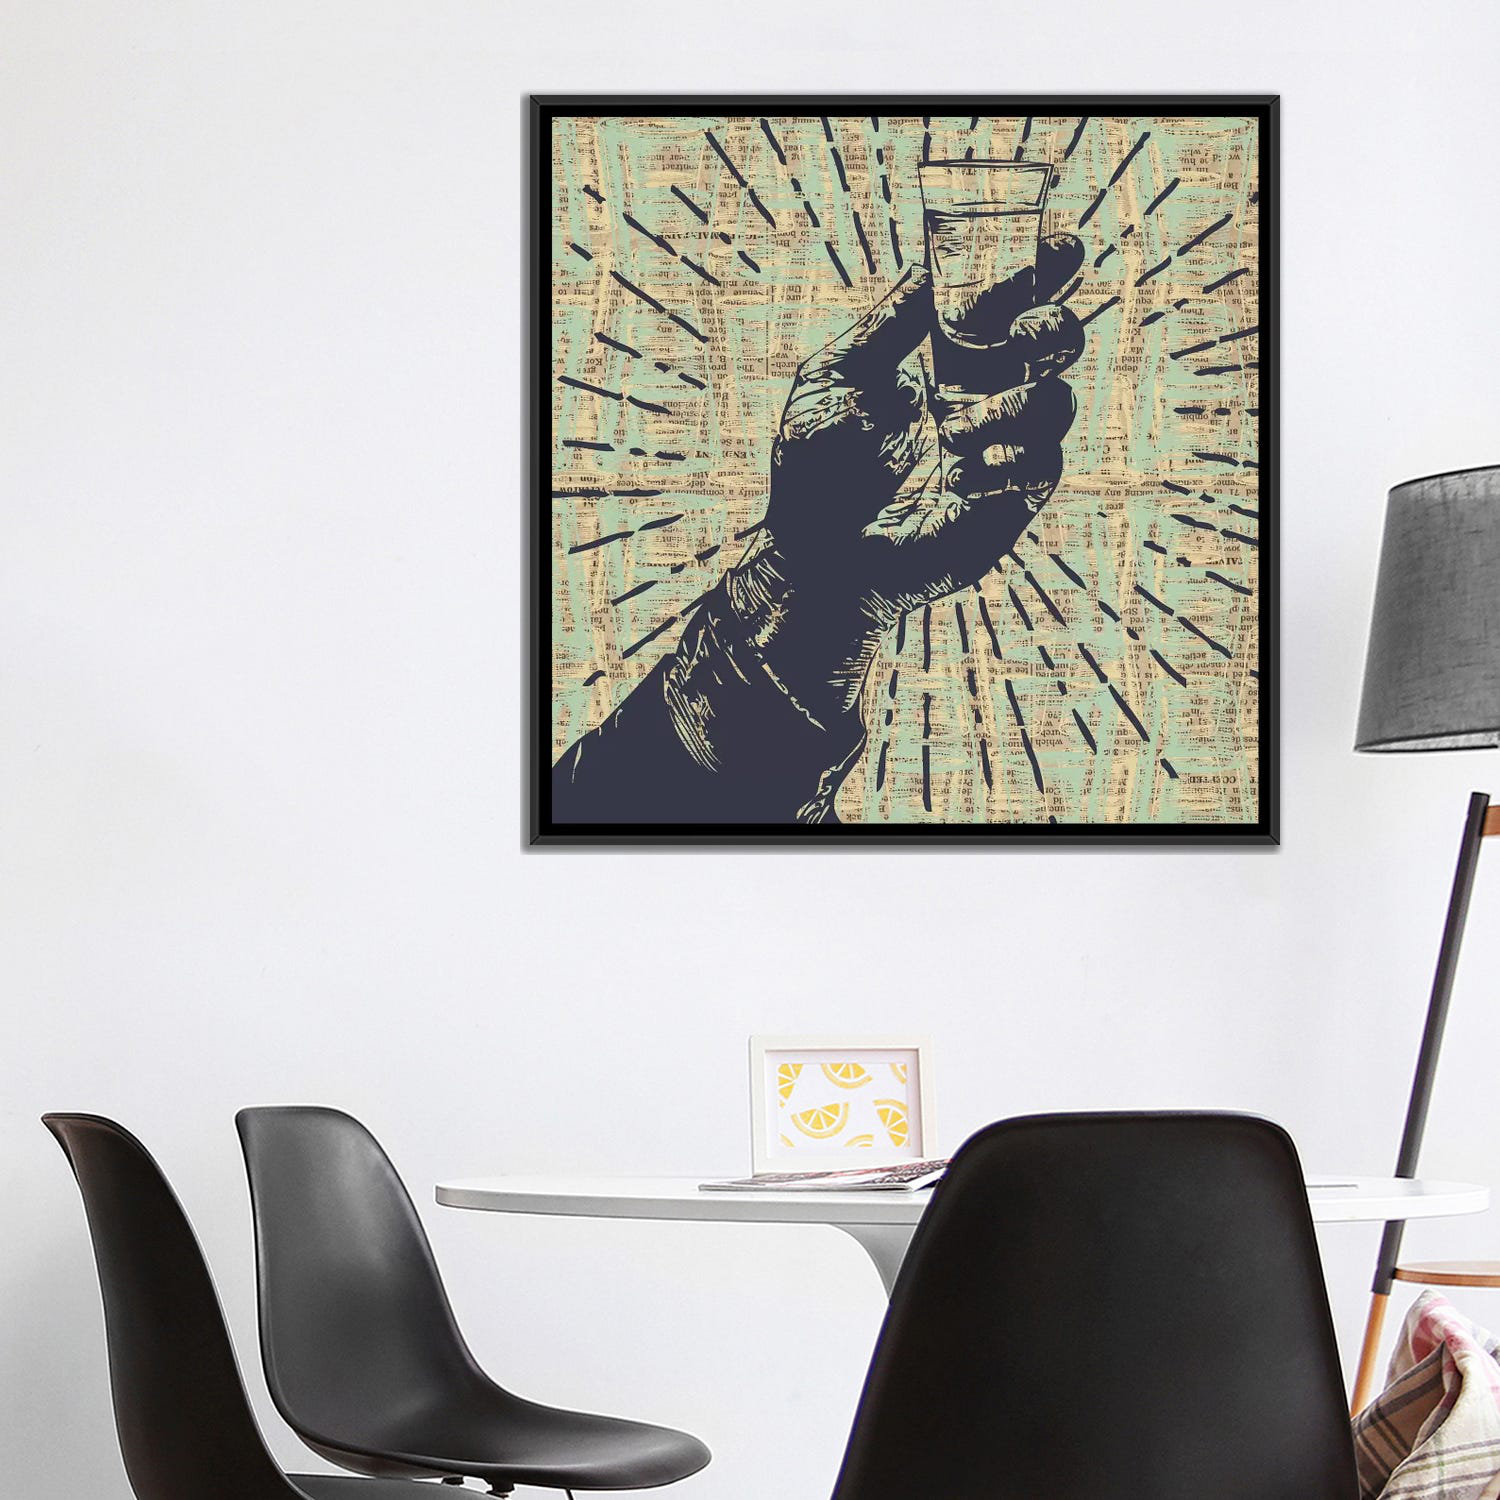 Bless international Shots! by Kyle Mosher - Gallery-Wrapped Canvas | Wayfair